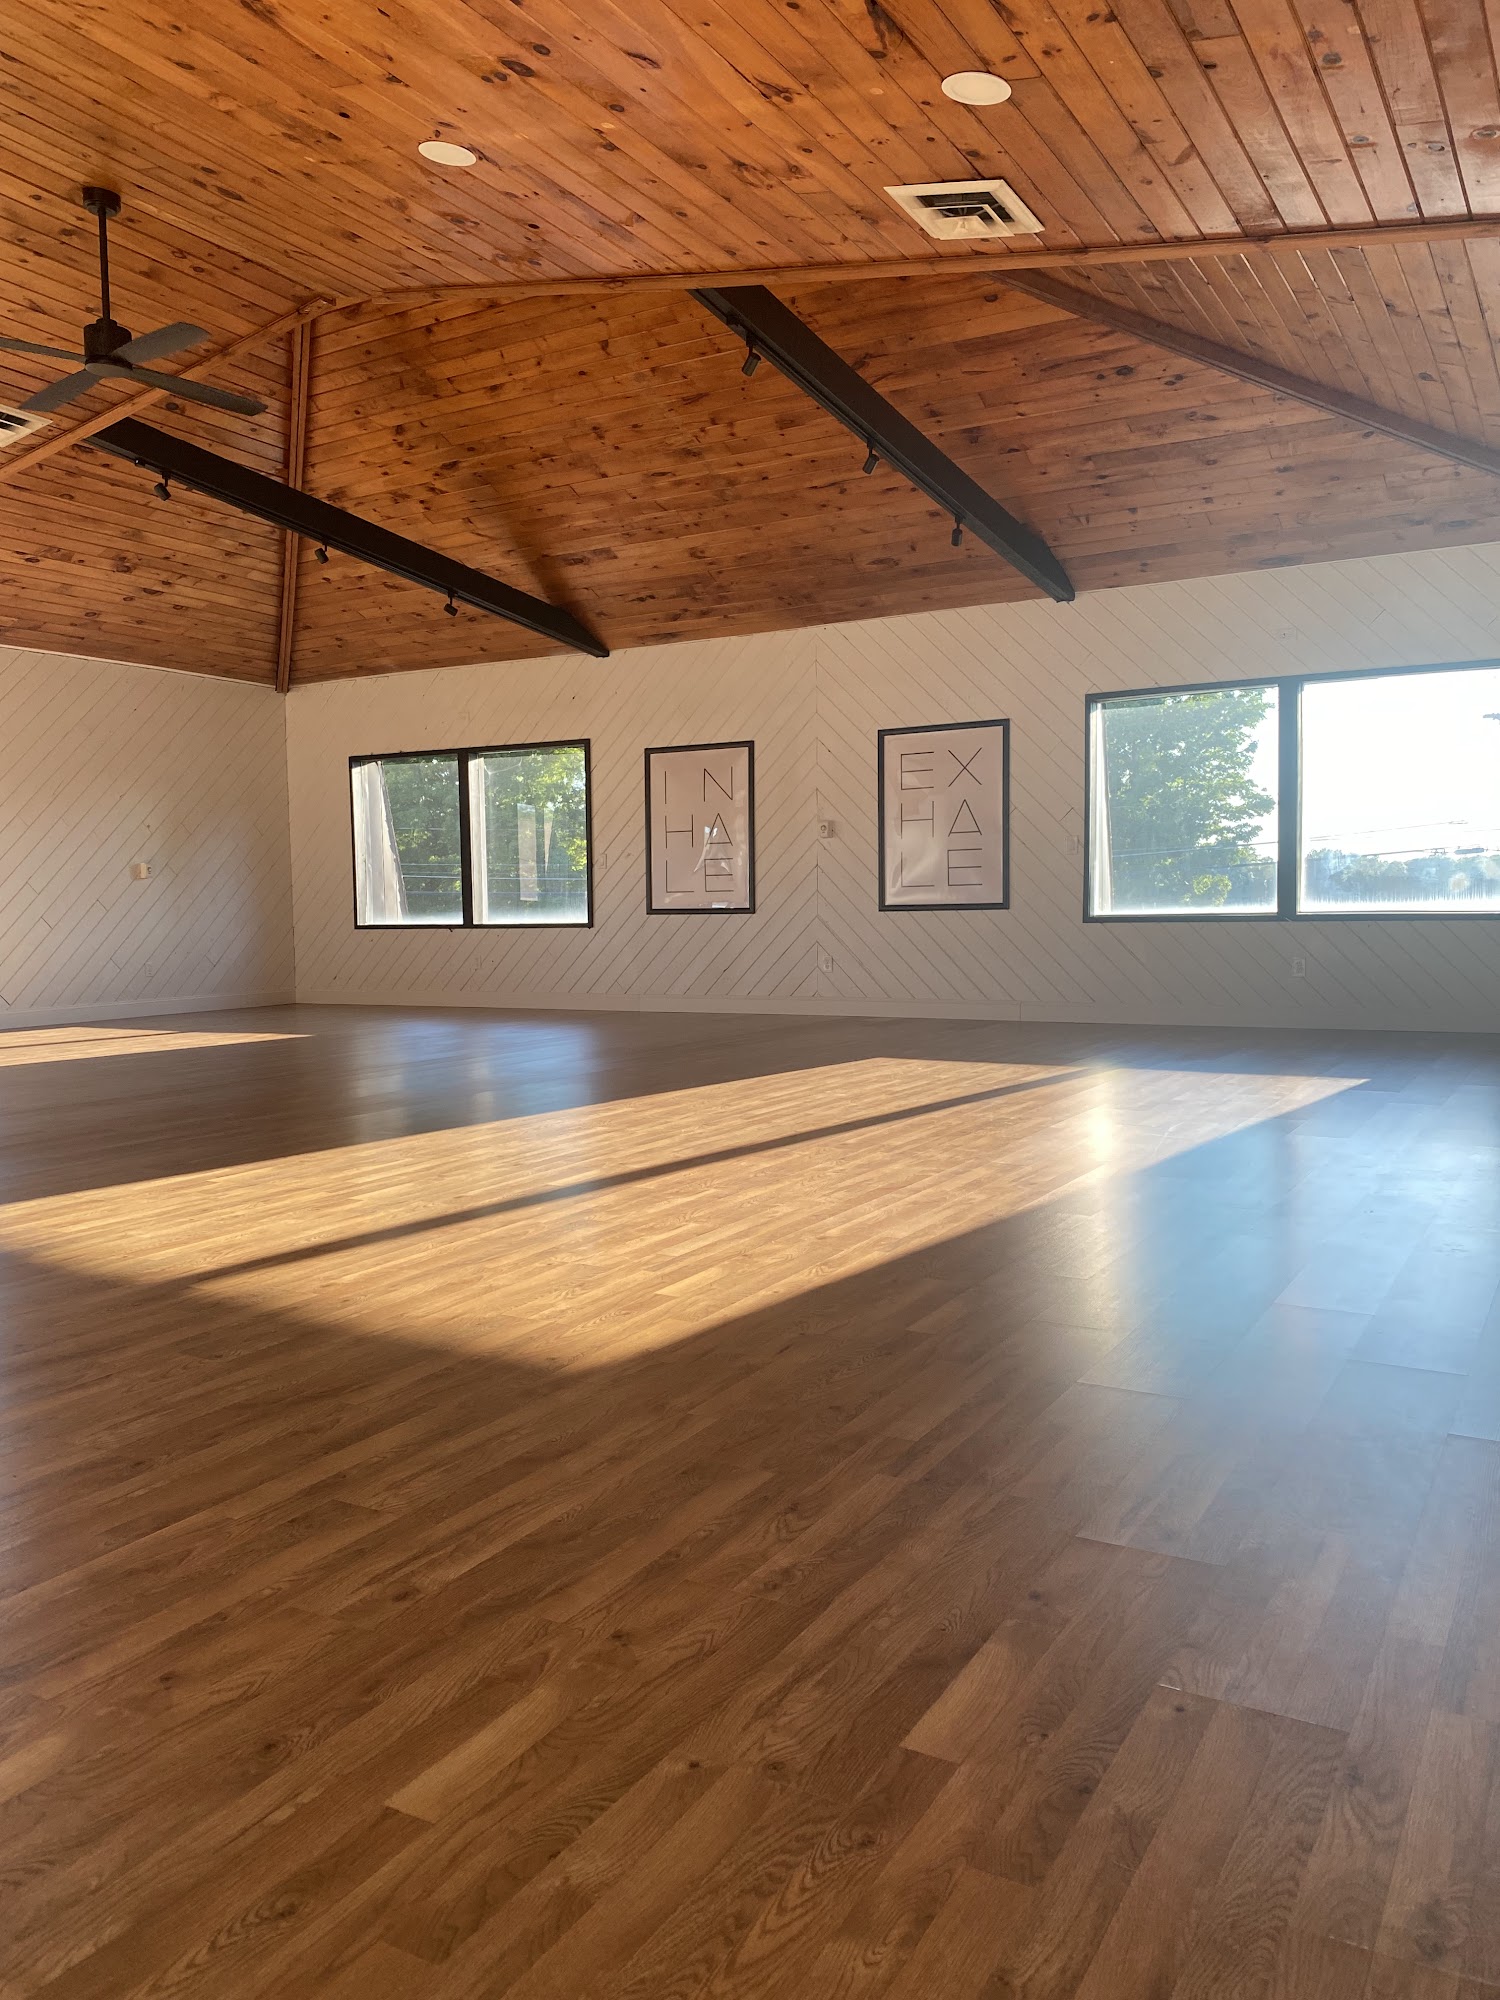 The Yoga Room 52 Waterbury Rd 2nd floor, Prospect Connecticut 06712